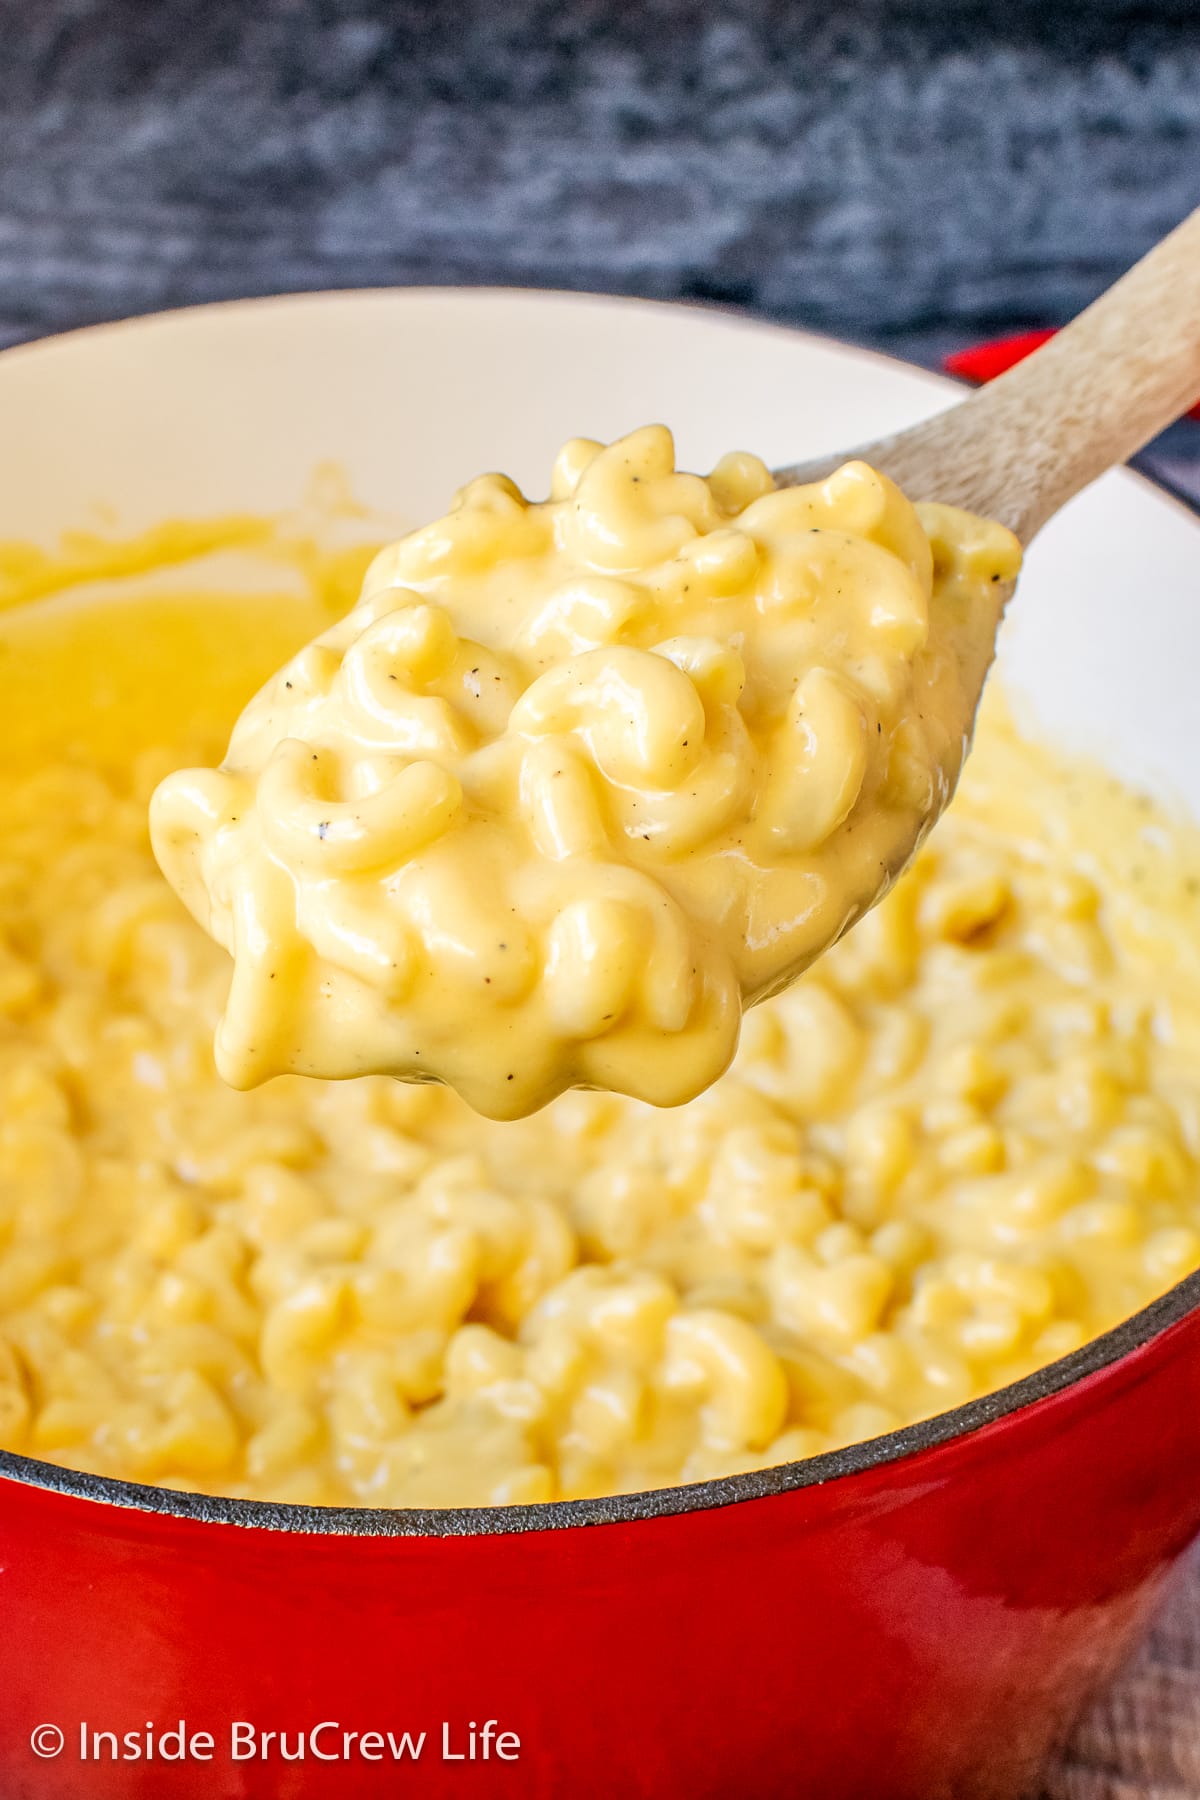 A wooden spoon lifting a scoop of creamy macaroni and cheese out of a red pot.